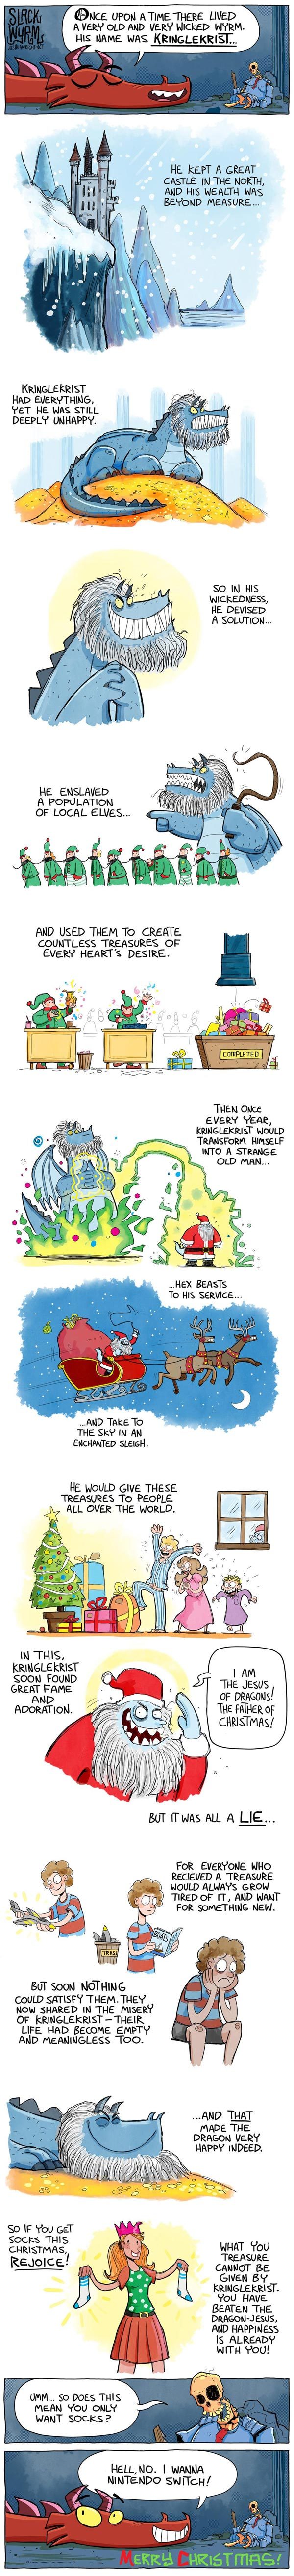 The Story of the Christmas Wyrm